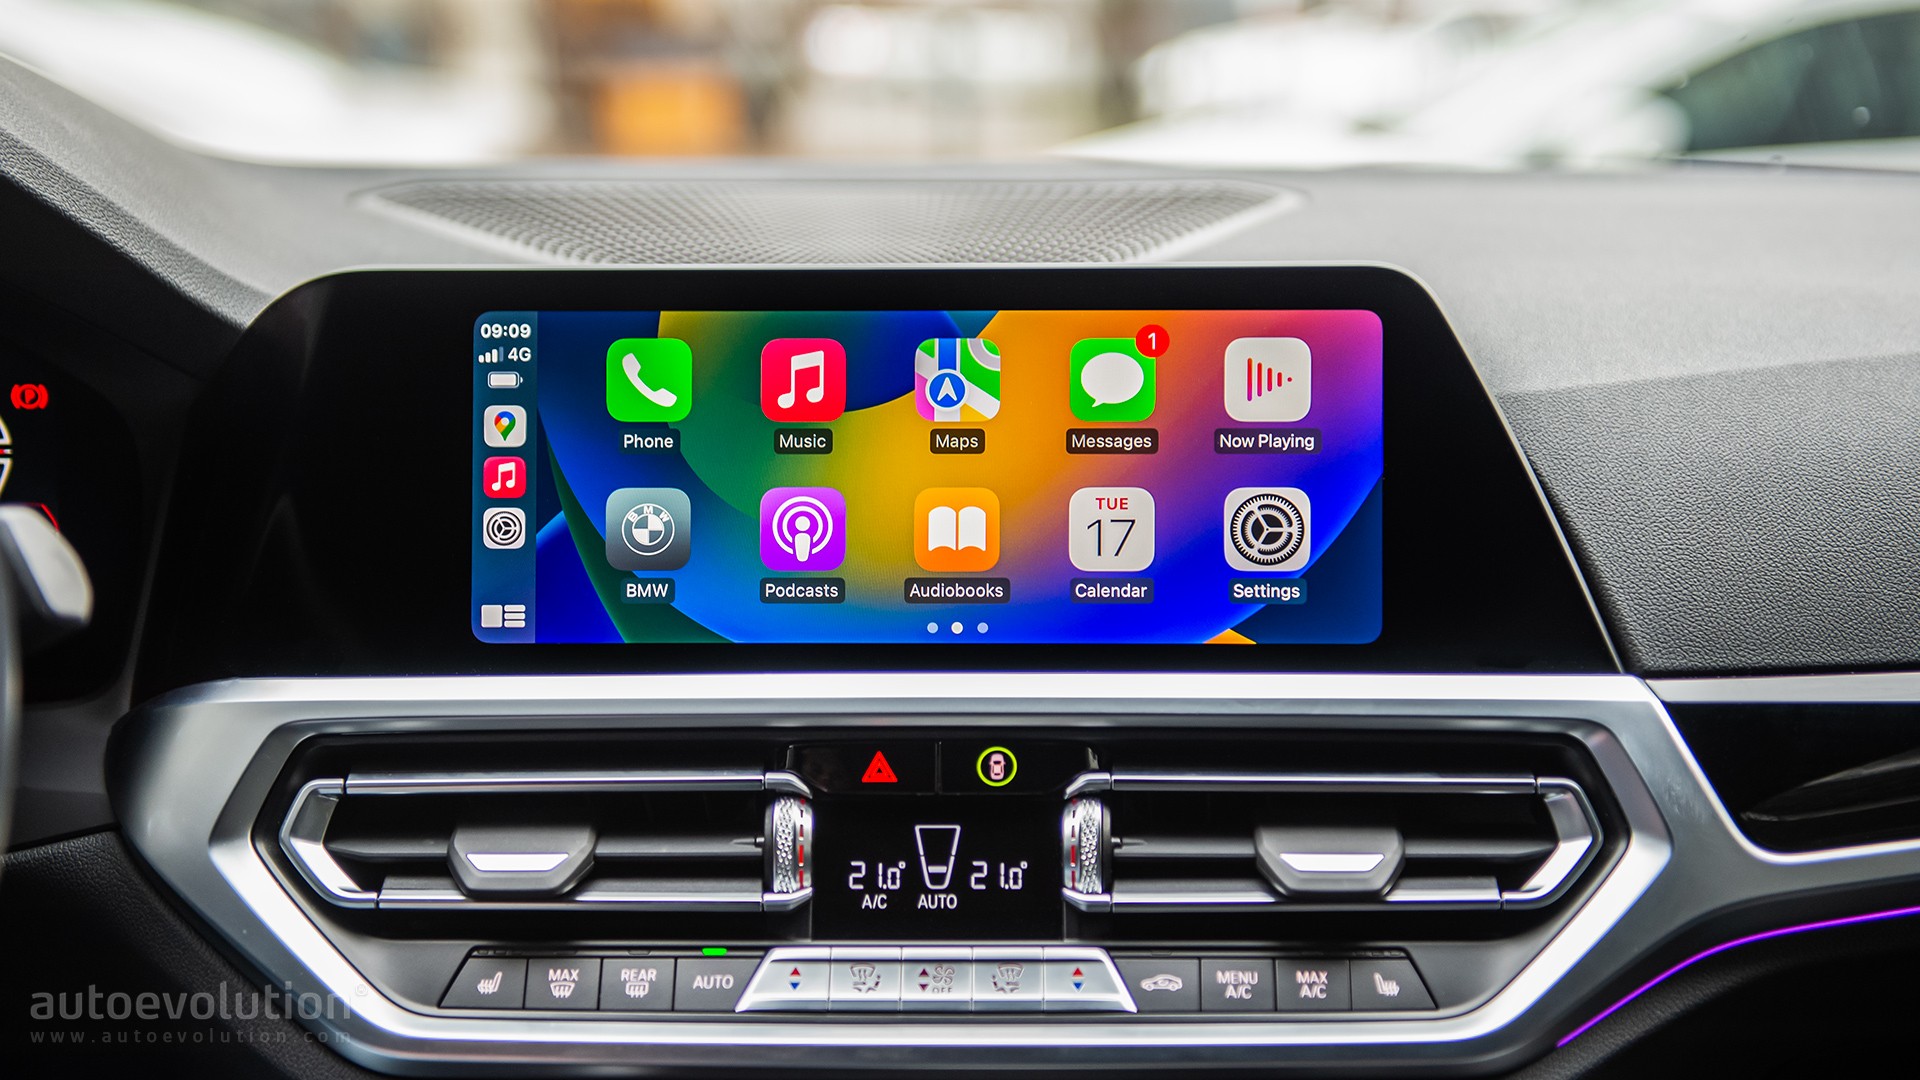 AAWireless Review  Android Auto Wireless for all car head-units 